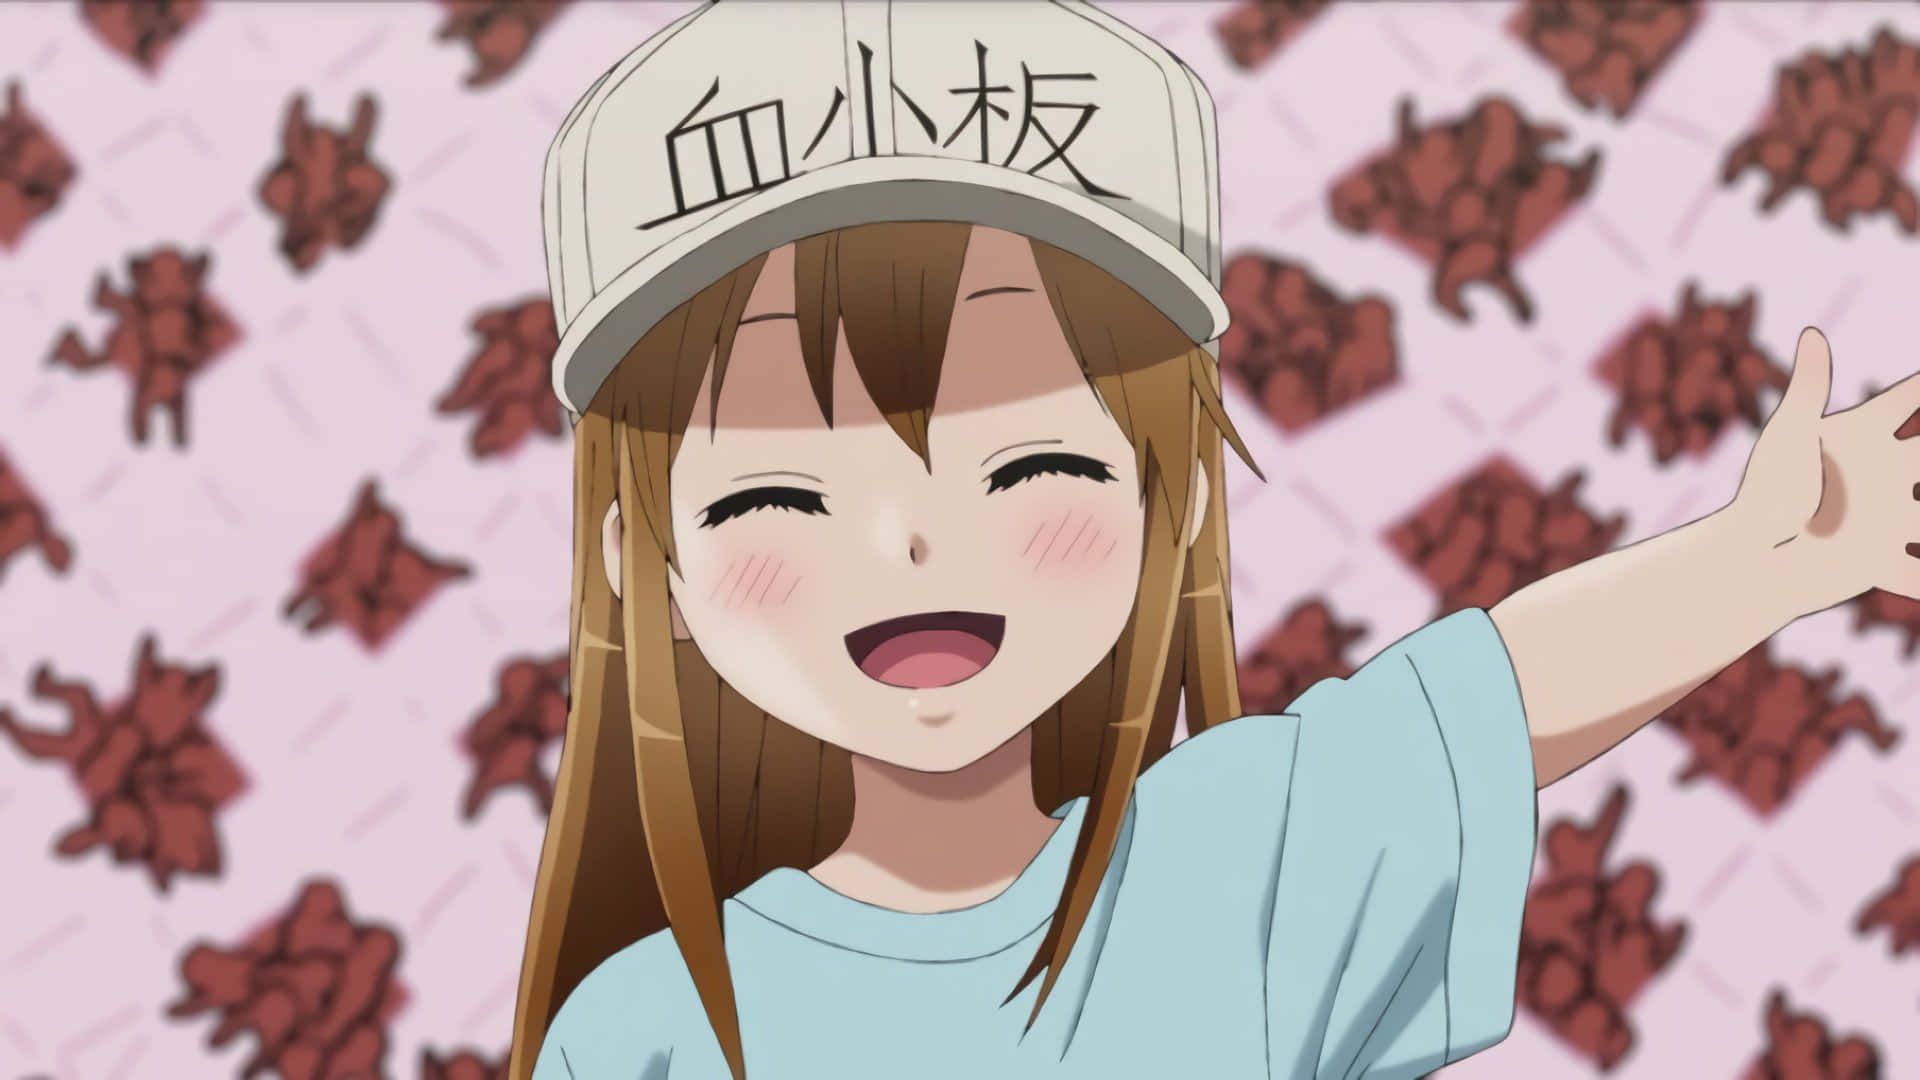 Cute Anime Platelets From Cells At Work! Series Wallpaper